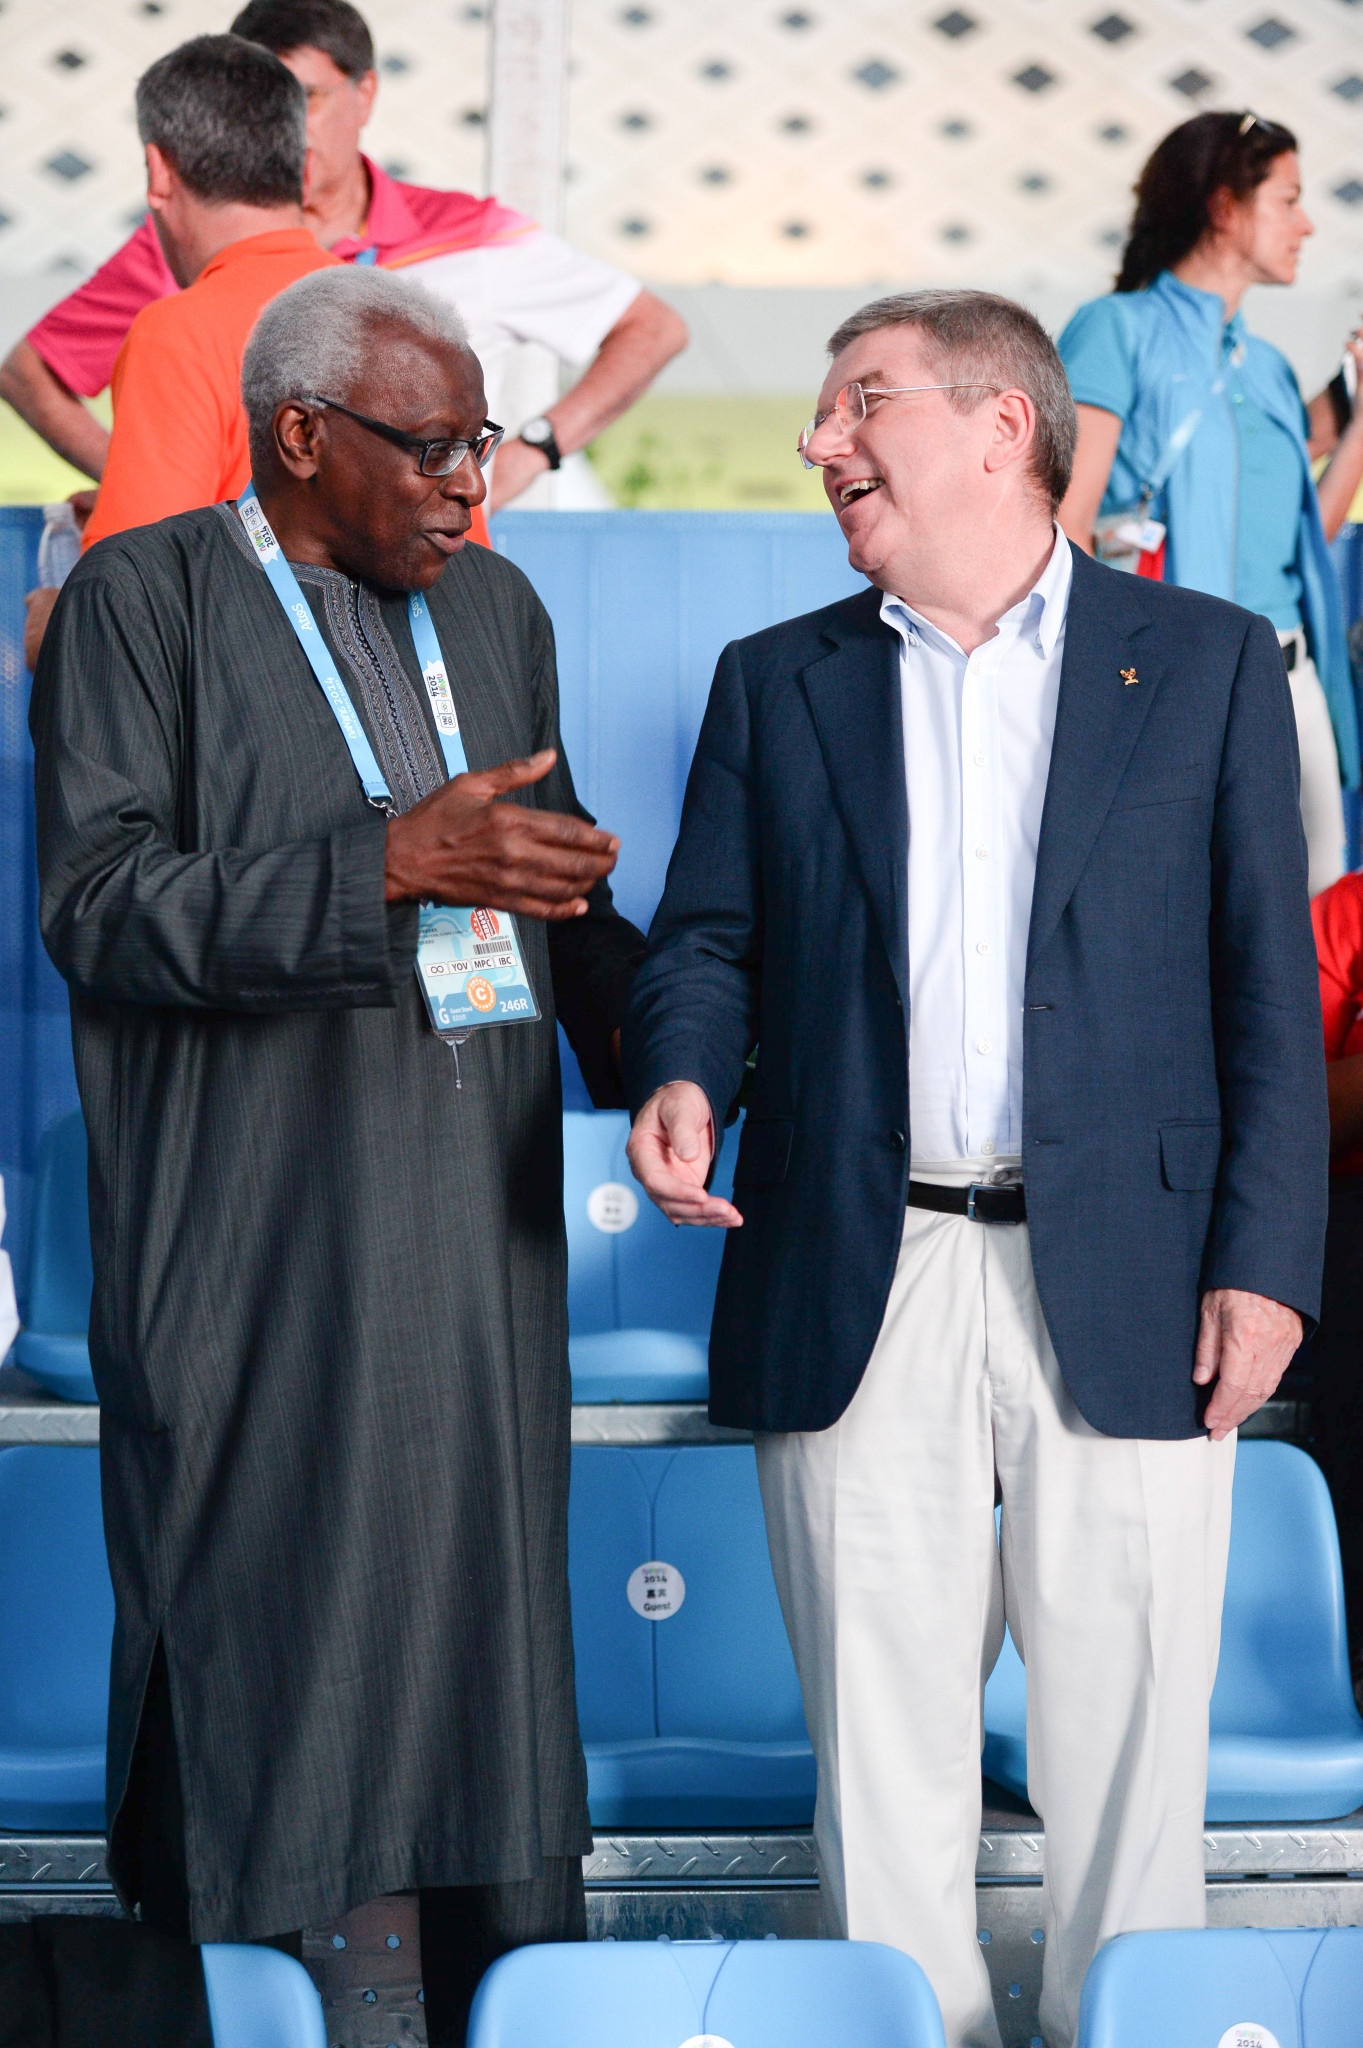 IOC President Thomas Bach, right, has claimed corruption allegations against former IAAF head Lamine Diack, left, have nothing to do with the Summer Youth Olympic Games due to take place in Dakar in 2022 ©Getty Images